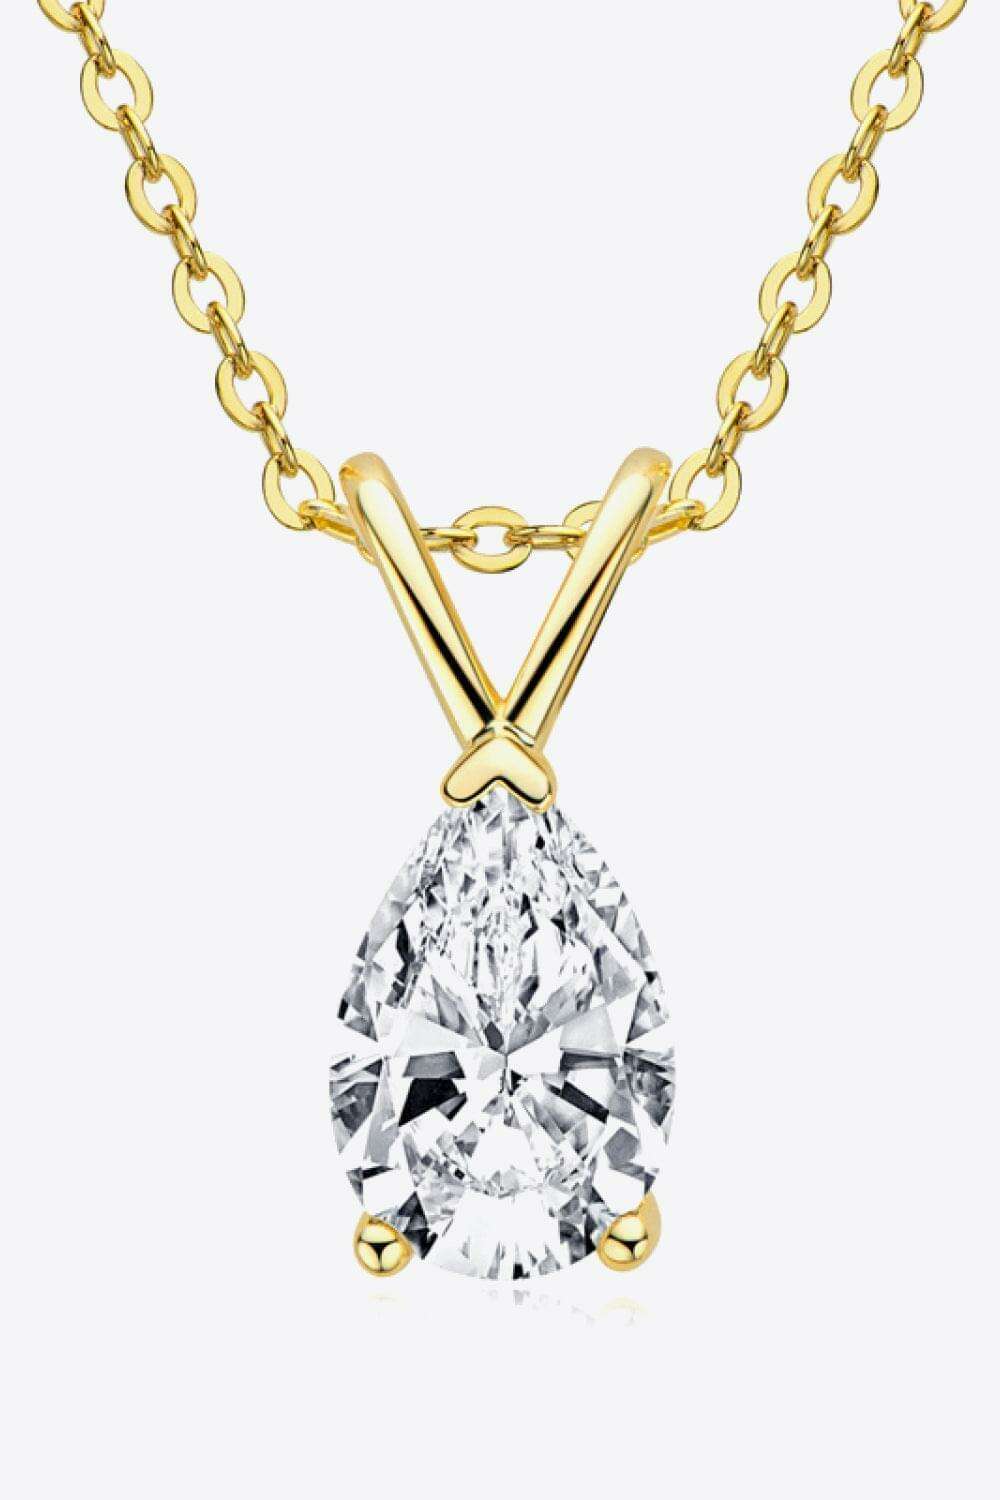 GOLD ONE SIZE 1.5 Carat Moissanite Pendant 925 Sterling Silver Necklace - gold or silver - necklace at TFC&H Co.